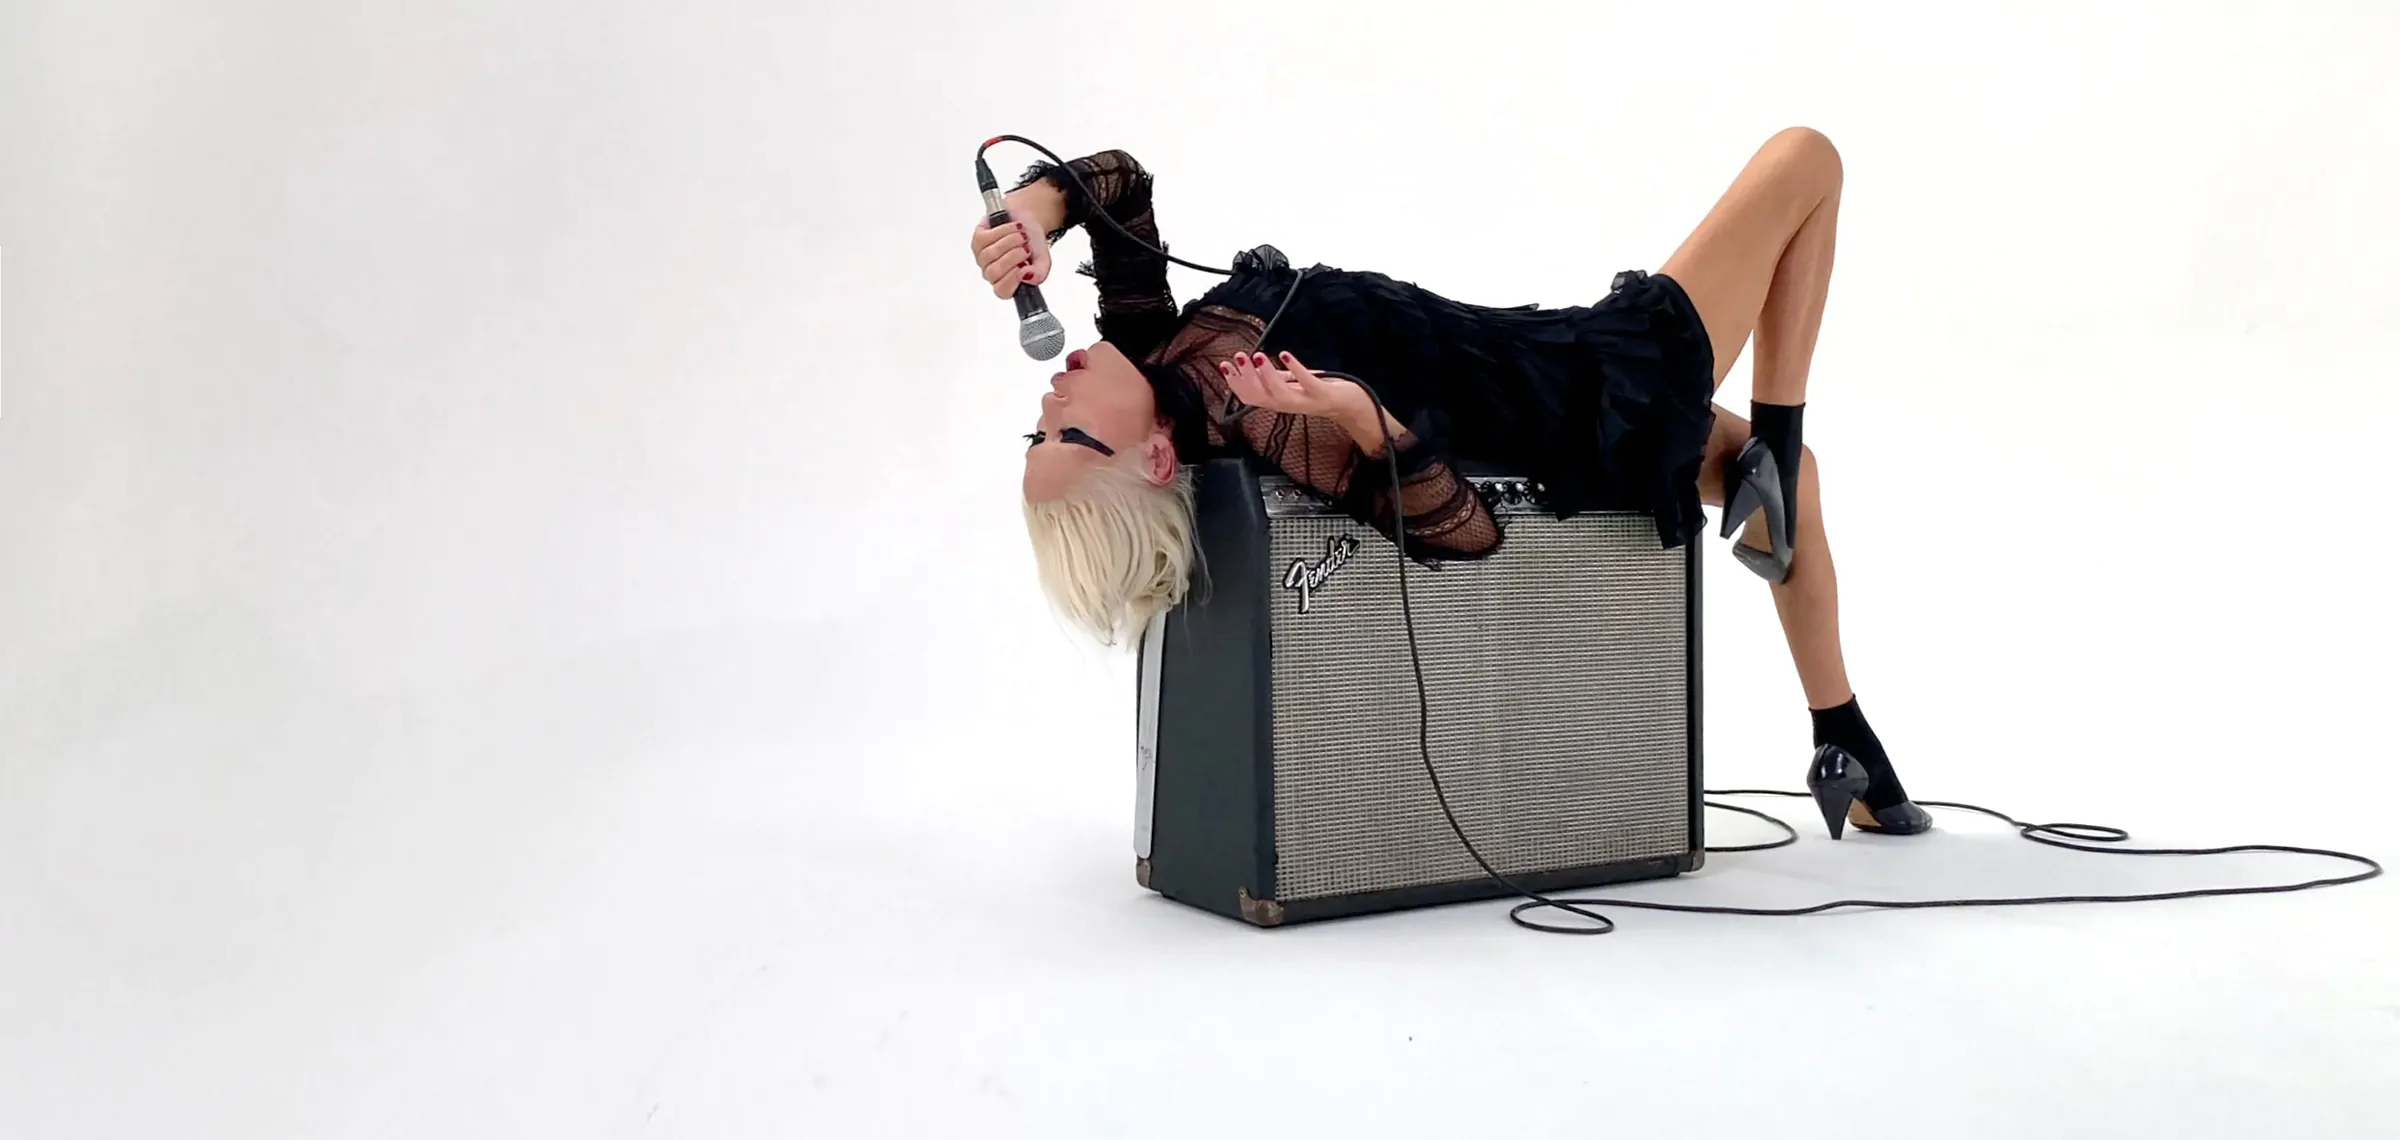 WENDY JAMES shares video for new single ‘The Impression Of Normalcy’ – Watch Now